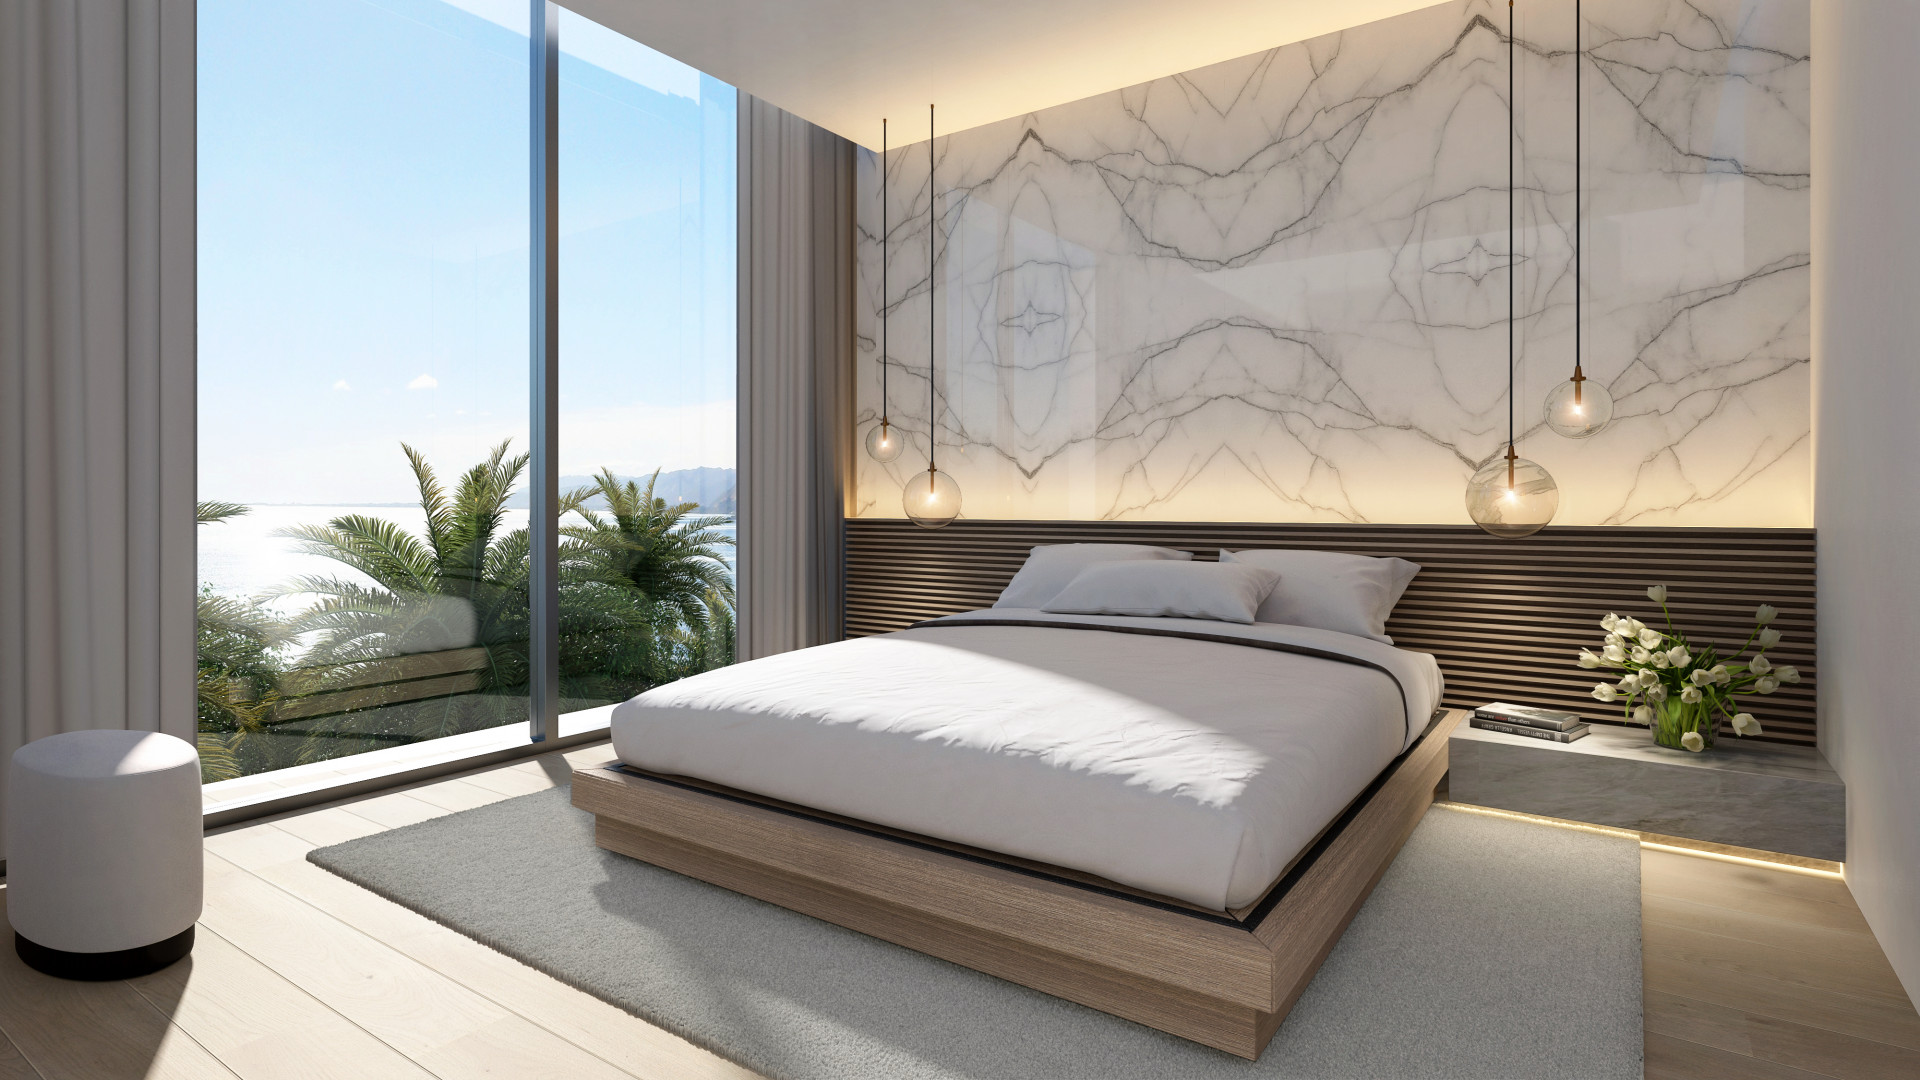 Ikkil Bay: Luxury residential project of nine homes with ocean views in Estepona. | Image 6